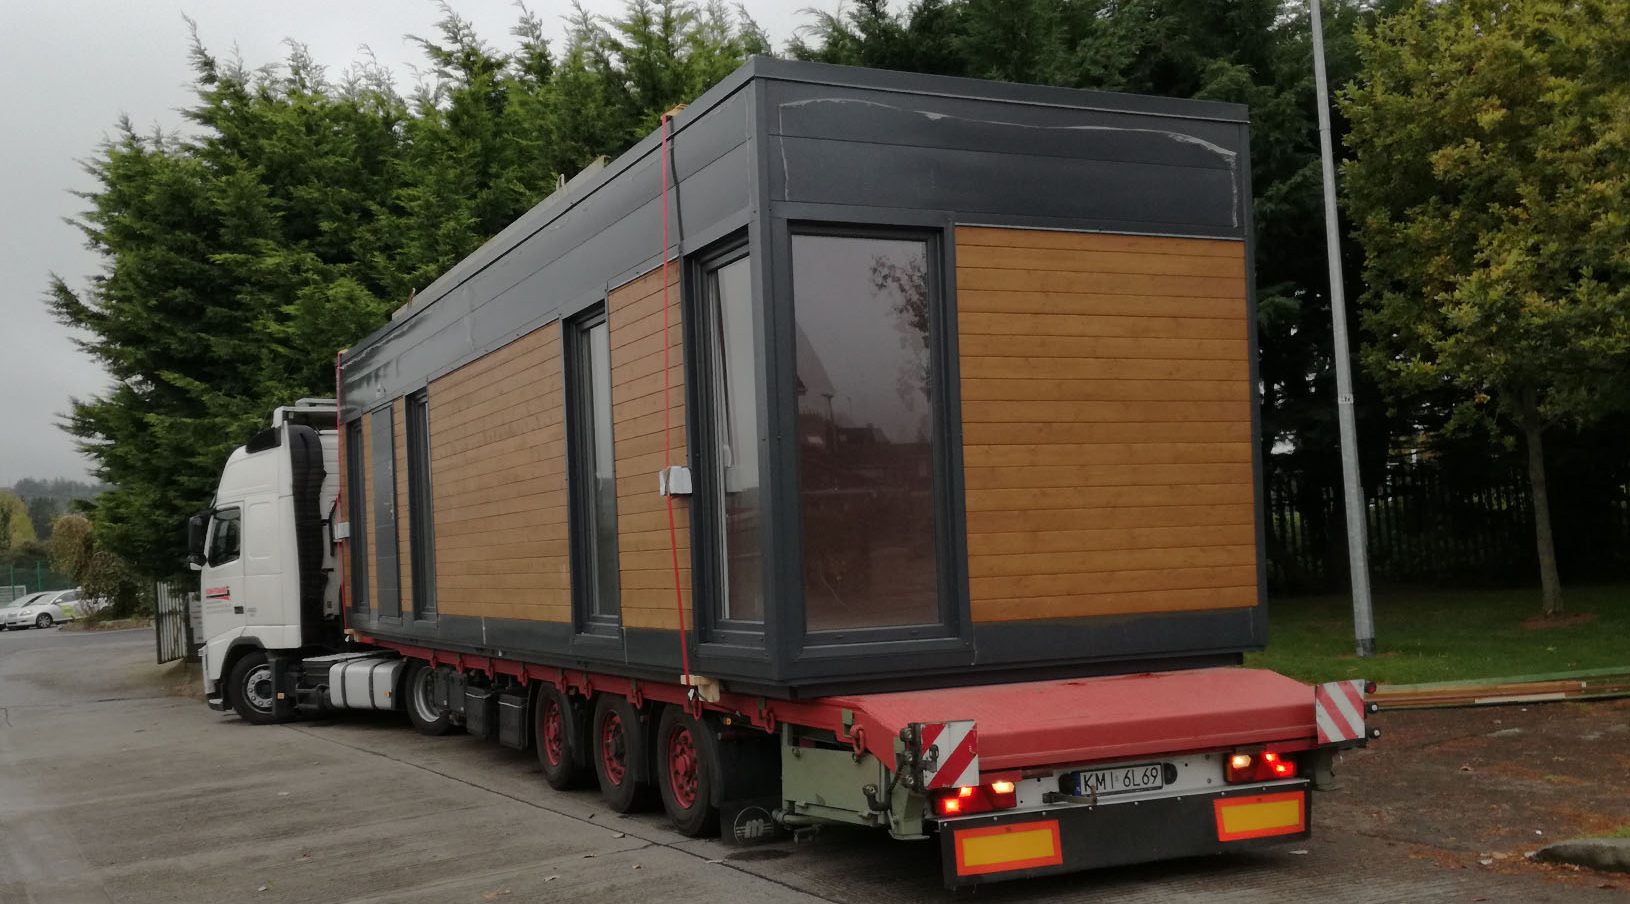 Choosing a Shipping Company to Transport Your Modular Home